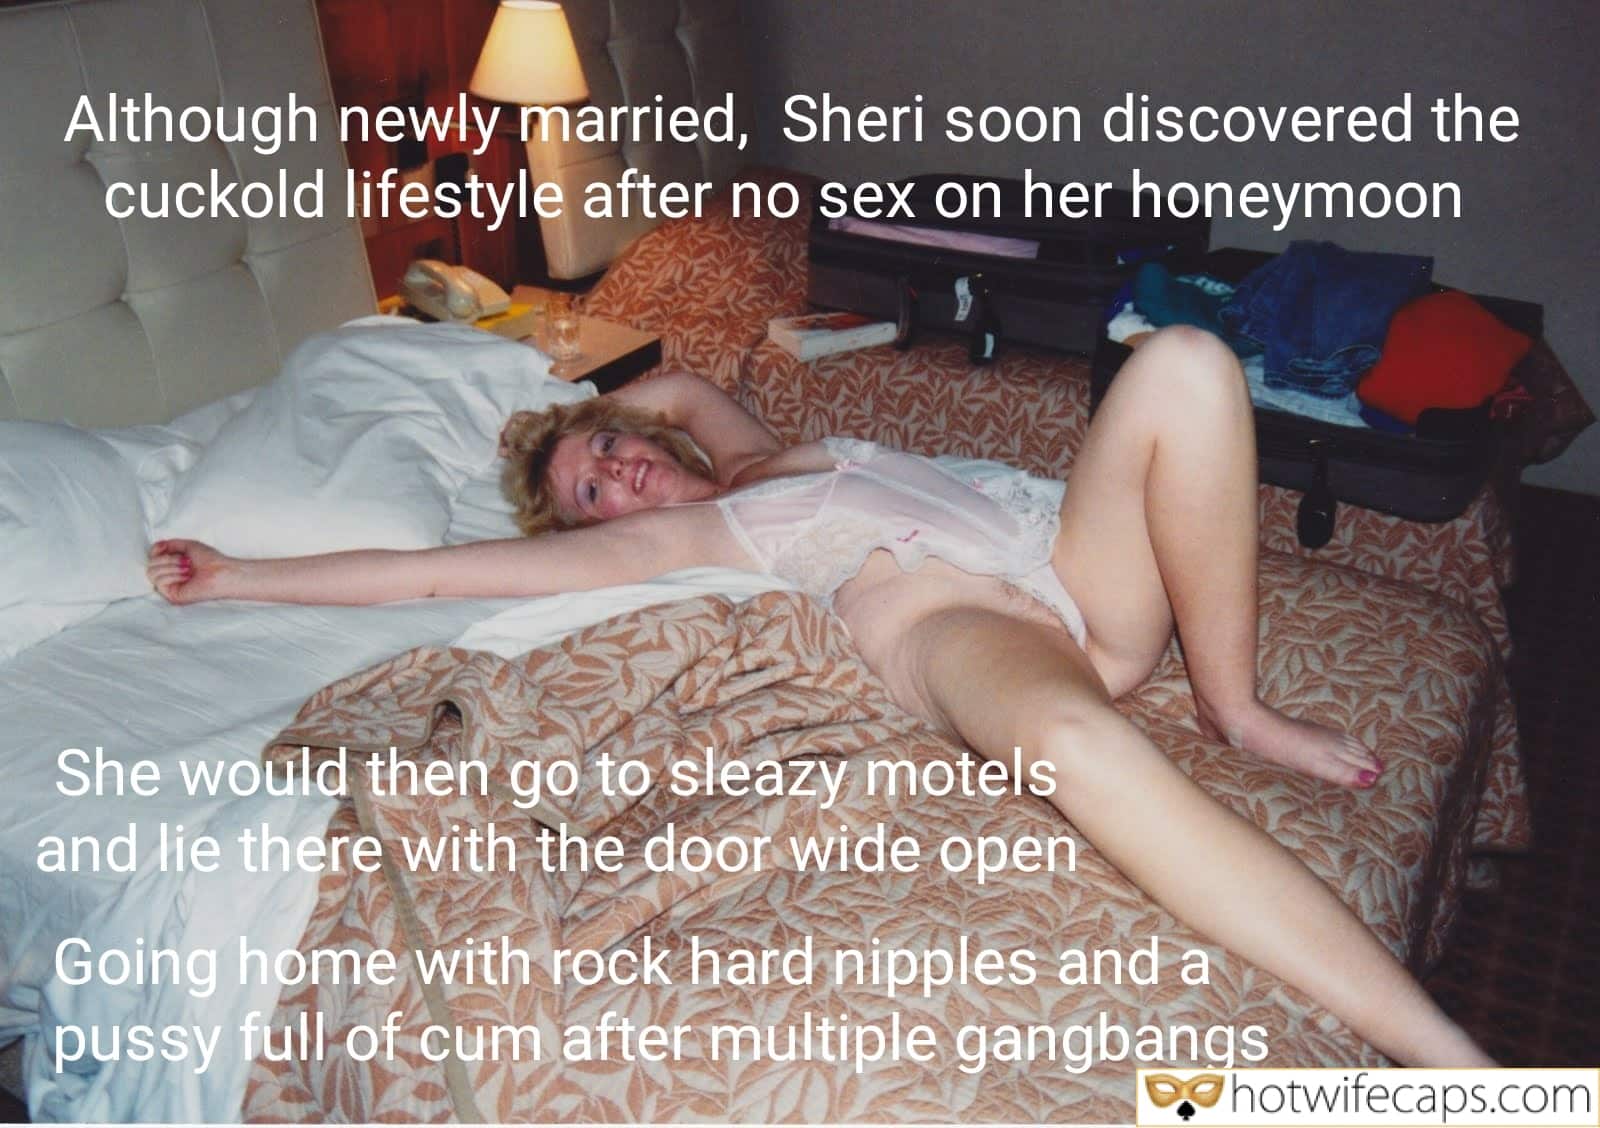 cuckold humiliation wife group sex make up cheating captions hotwife caption Photo of slutty wife in bed before scheduled hotel gang bang